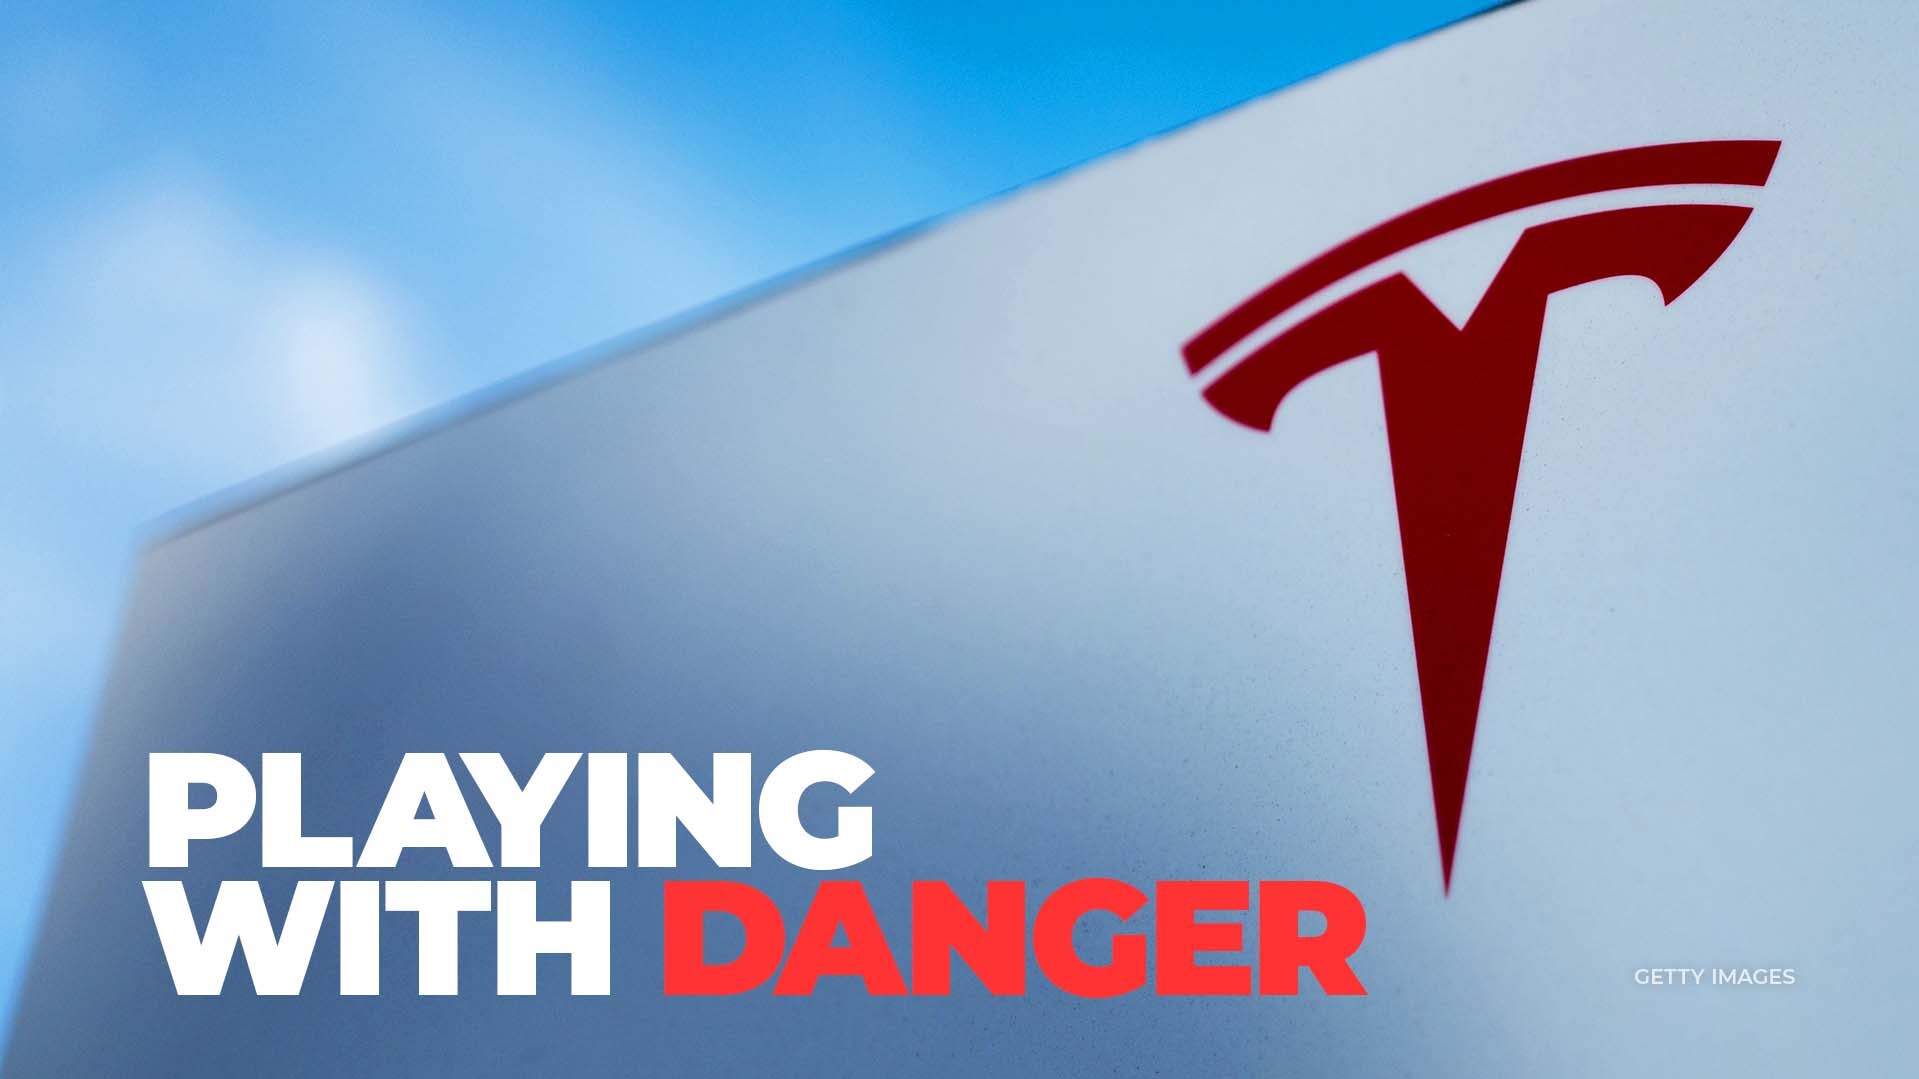 The National Highway Traffic and Safety Administration announced it is opening an investigation into Tesla's "Passenger Play" feature.